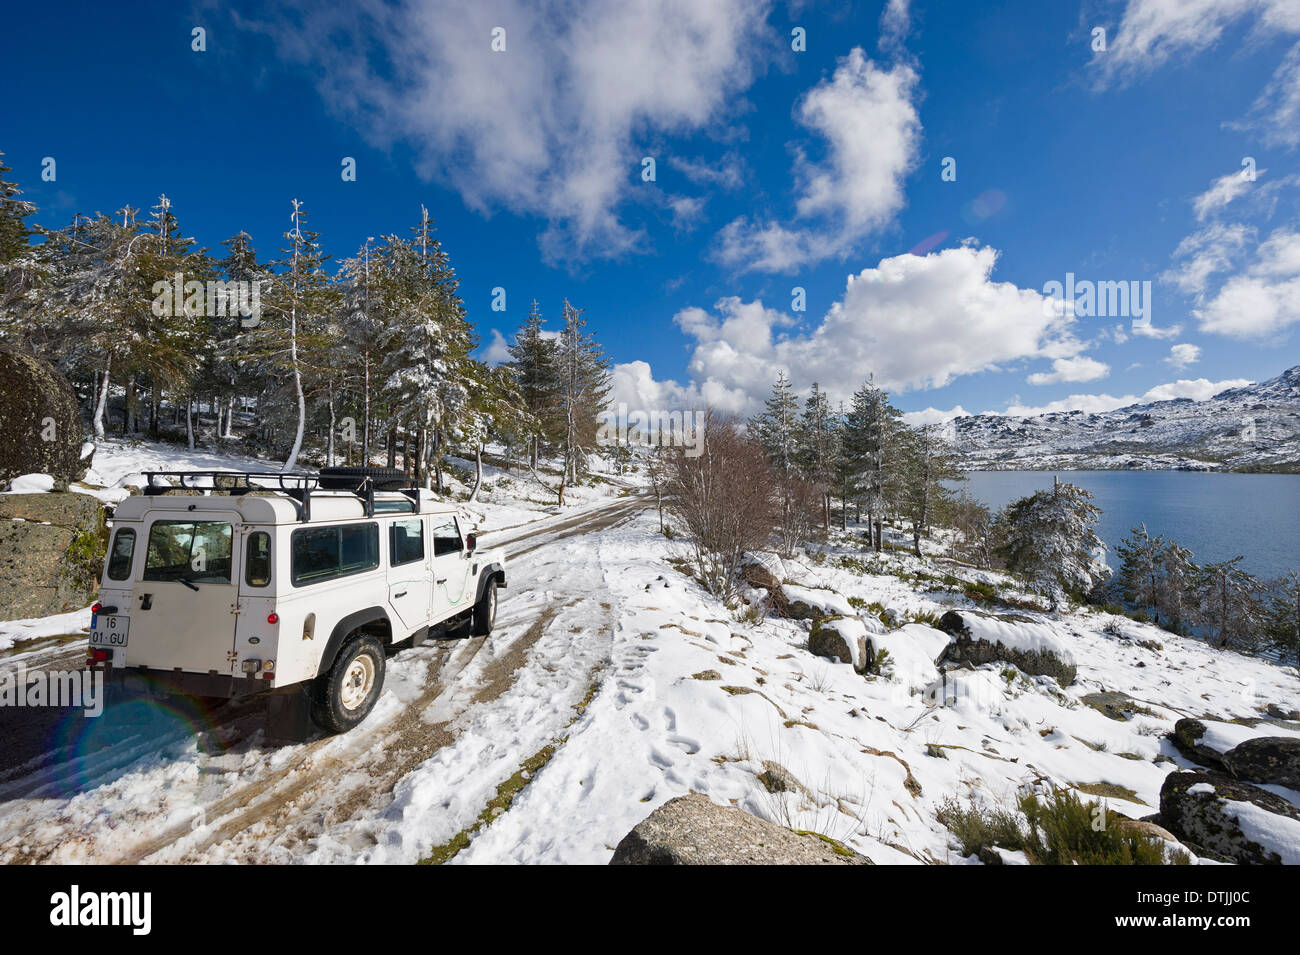 Land Rover Defender 4x4 vehicle on snowy landscape Stock Photo